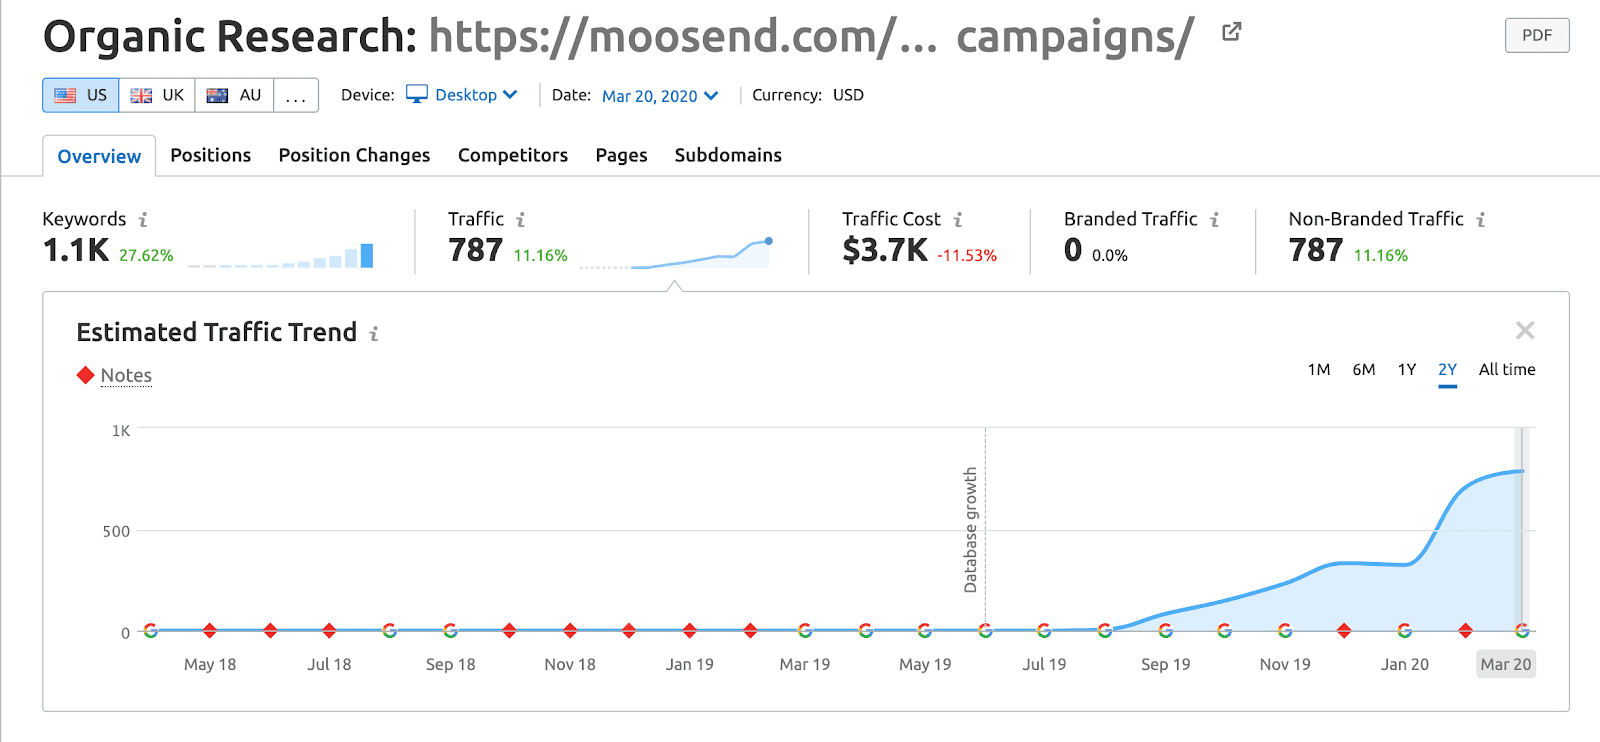 A traffic example from Moosend after posting about campaigns